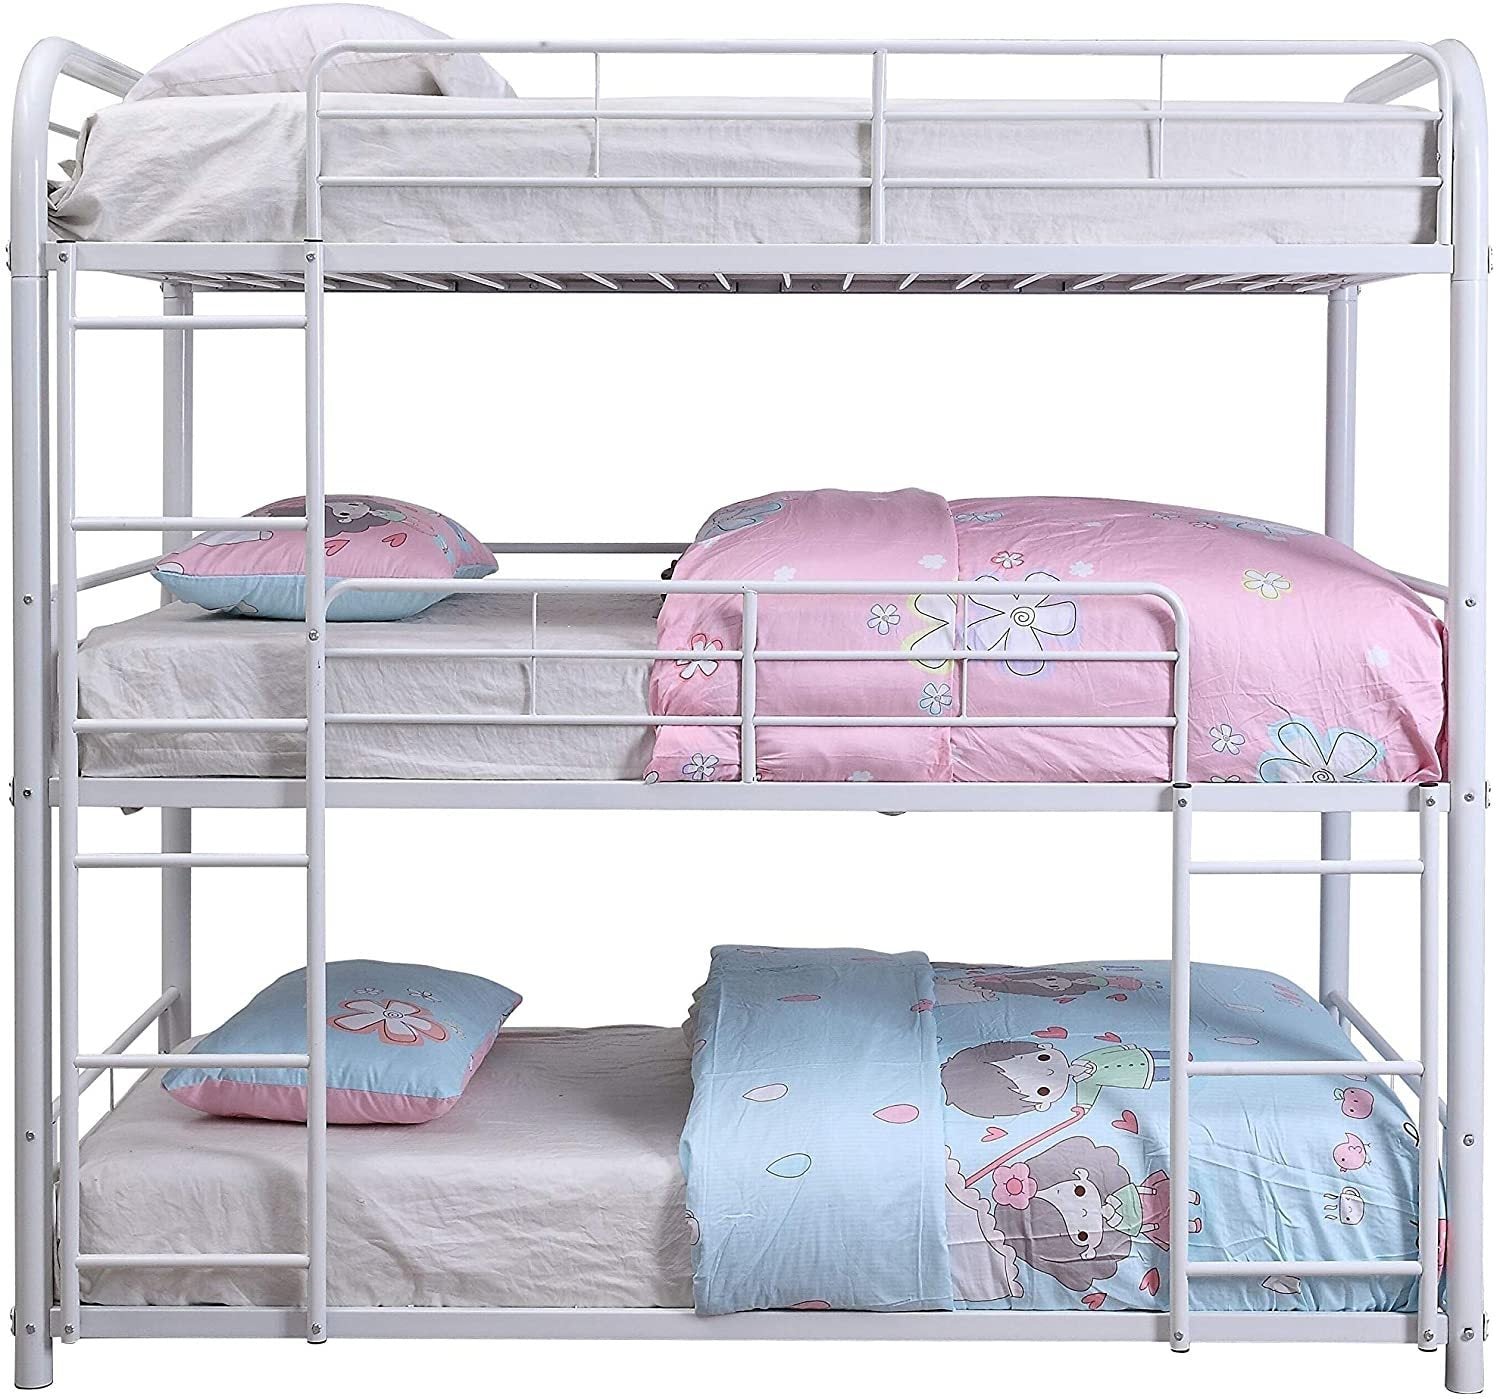 ACME Cairo Bunk Bed - Triple Full in White 38115